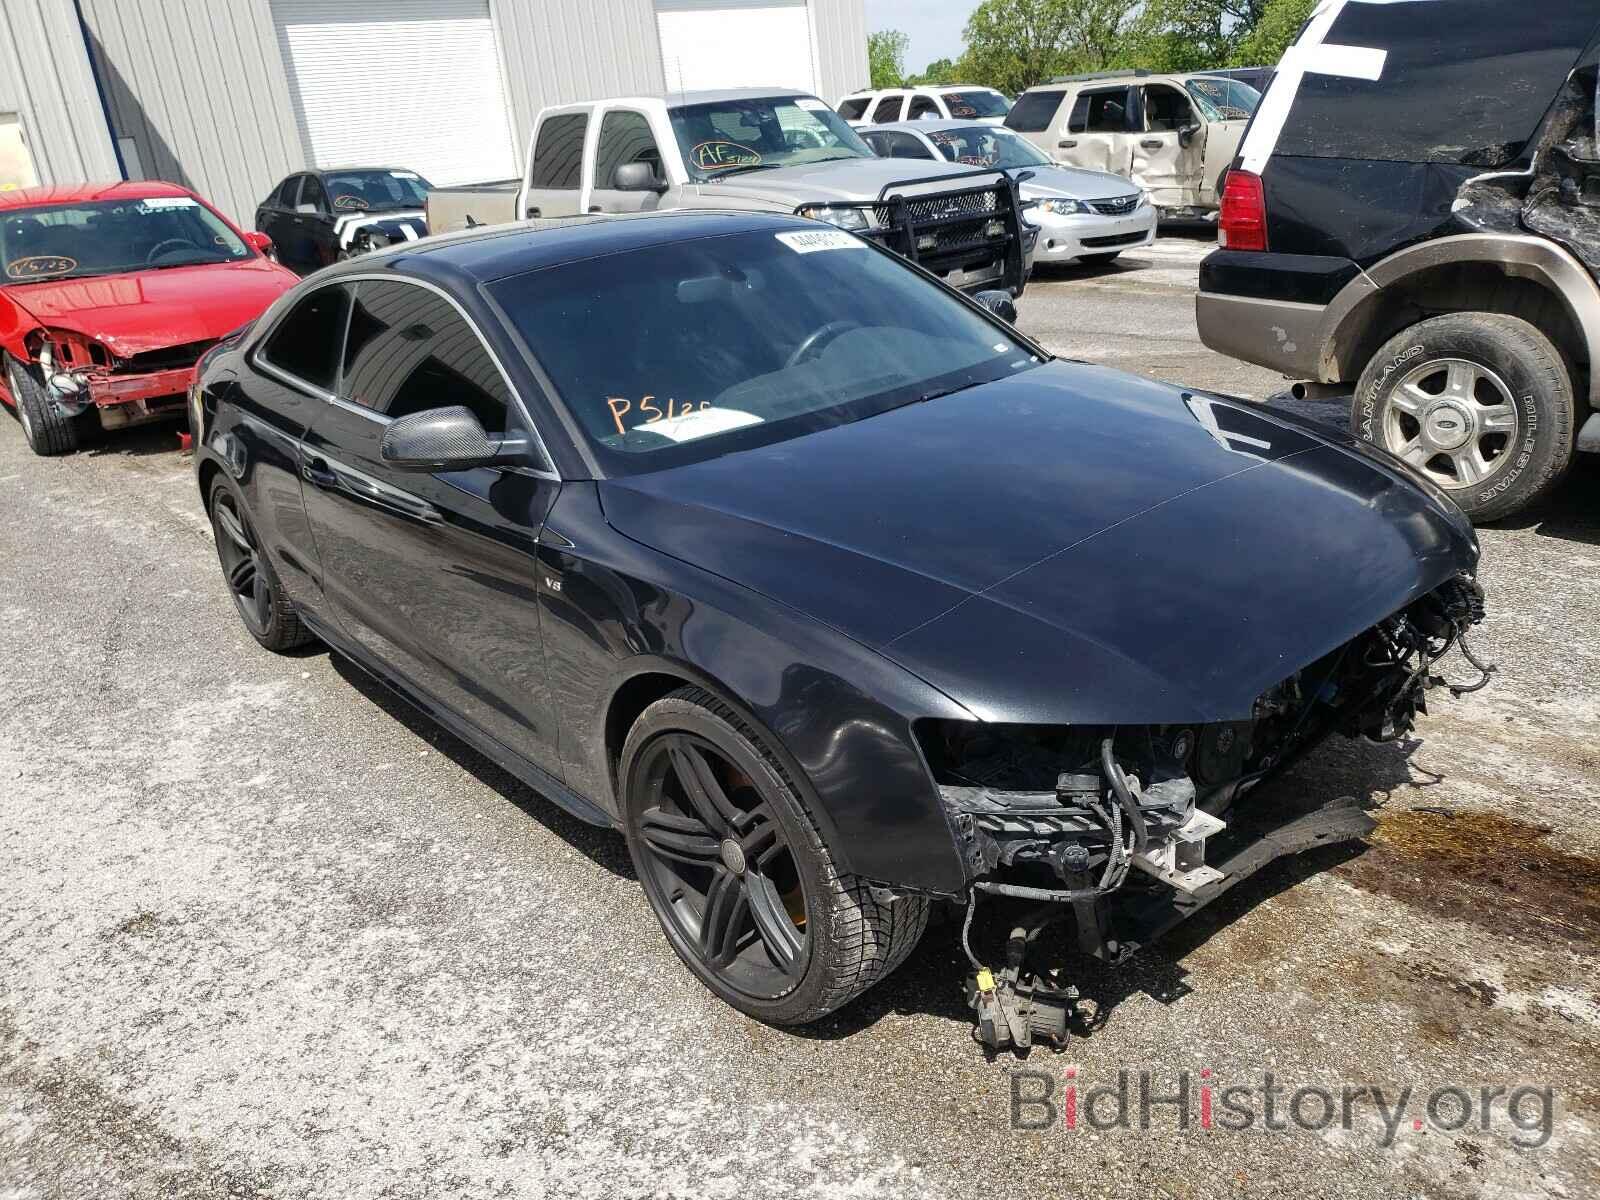 Photo WAUVVAFR7BA012529 - AUDI S5/RS5 2011